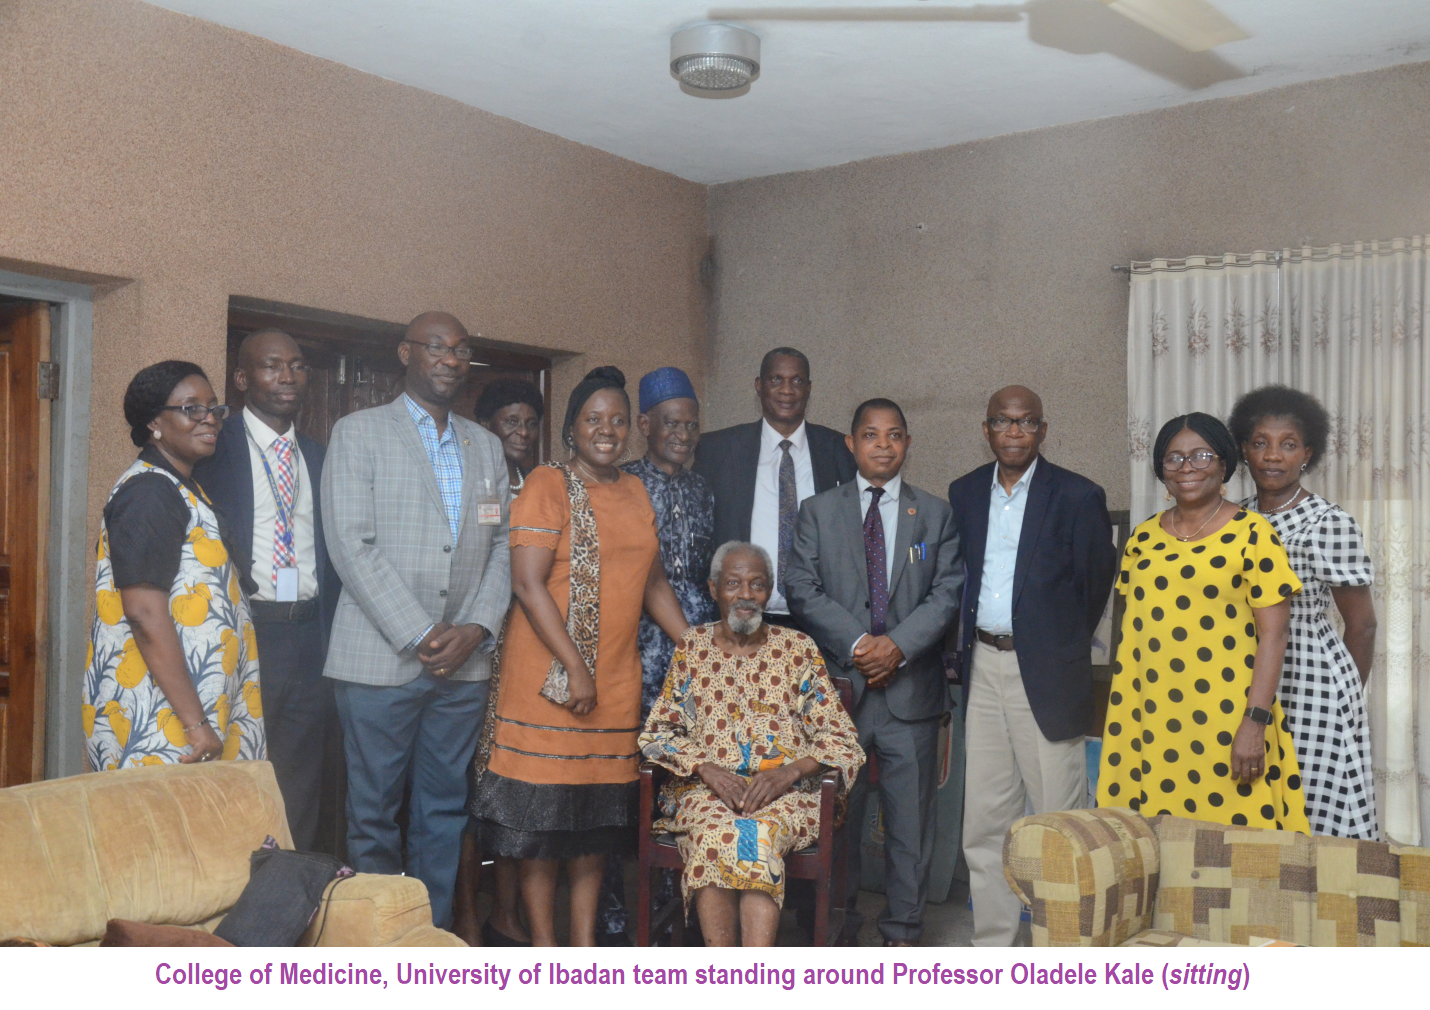 CONDOLENCE VISIT BY THE UNIVERSITY OF IBADAN COLLEGE OF MEDICINE EXECUTIVE COMMITTEE TO PROFESSOR OLADELE OLUSOJI KALE ON THE LOSS OF HIS BELOVED WIFE,  MAJOR GENERAL (RTD) DR. ADERONKE KALE